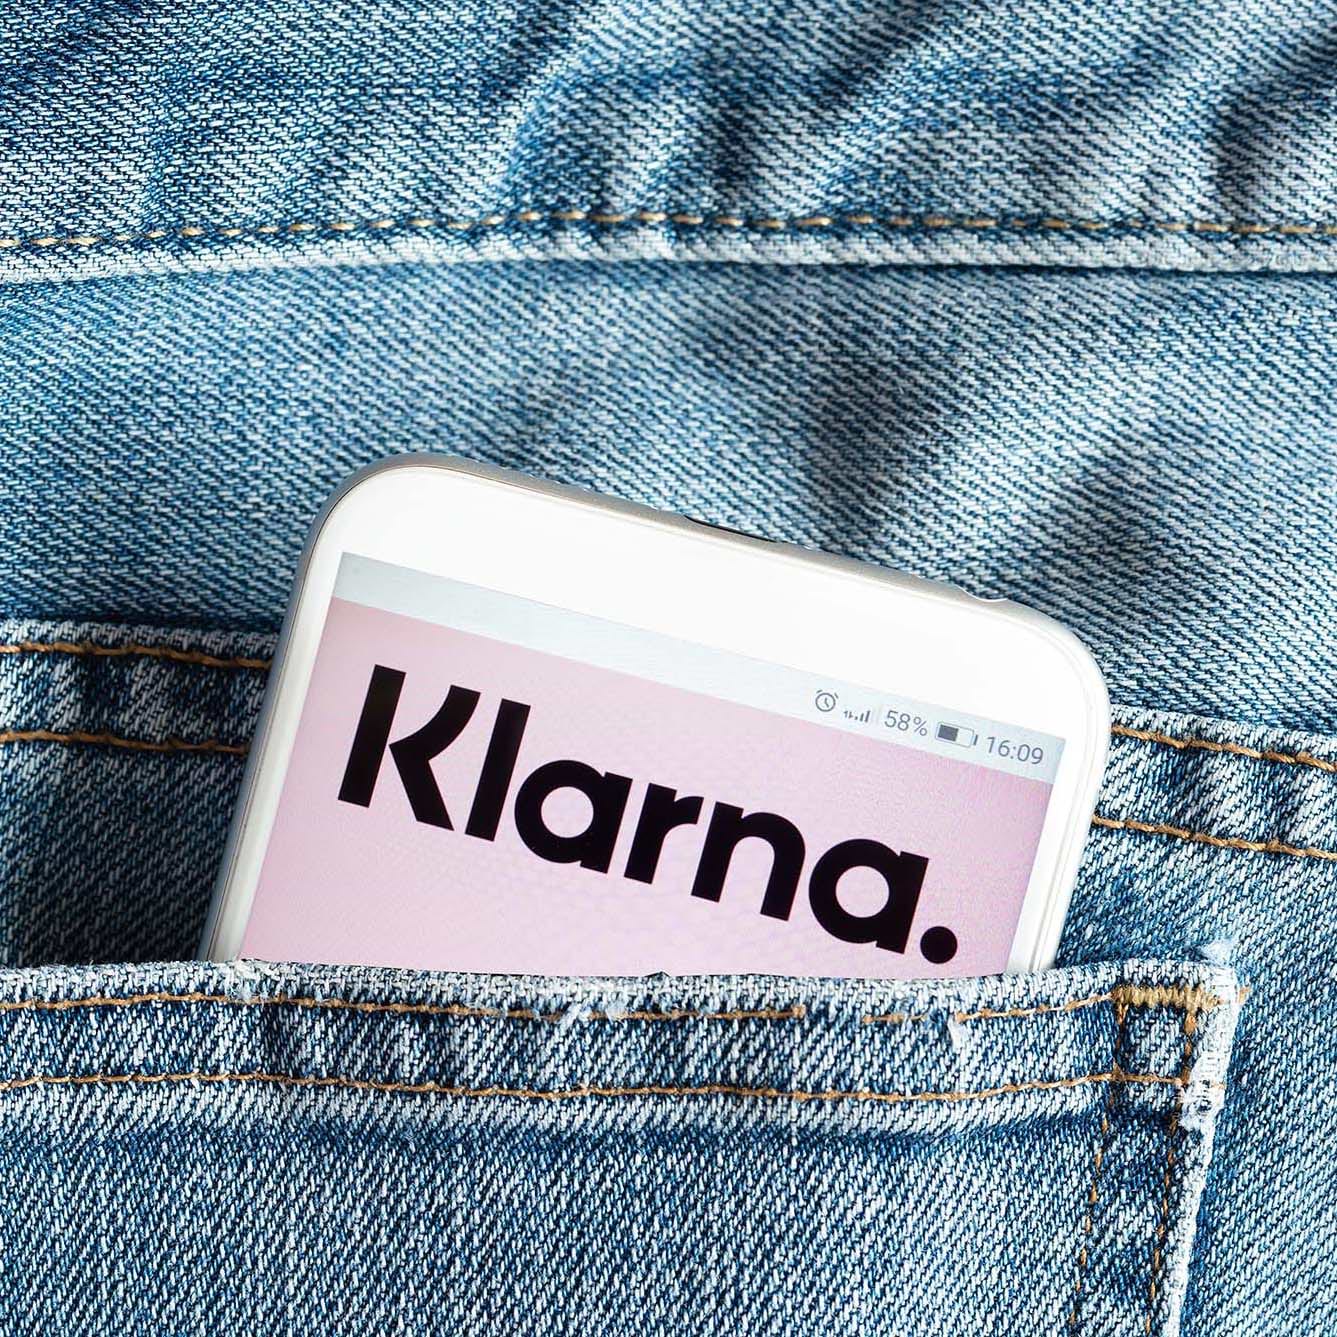 Shop now, pay later with Klarna!